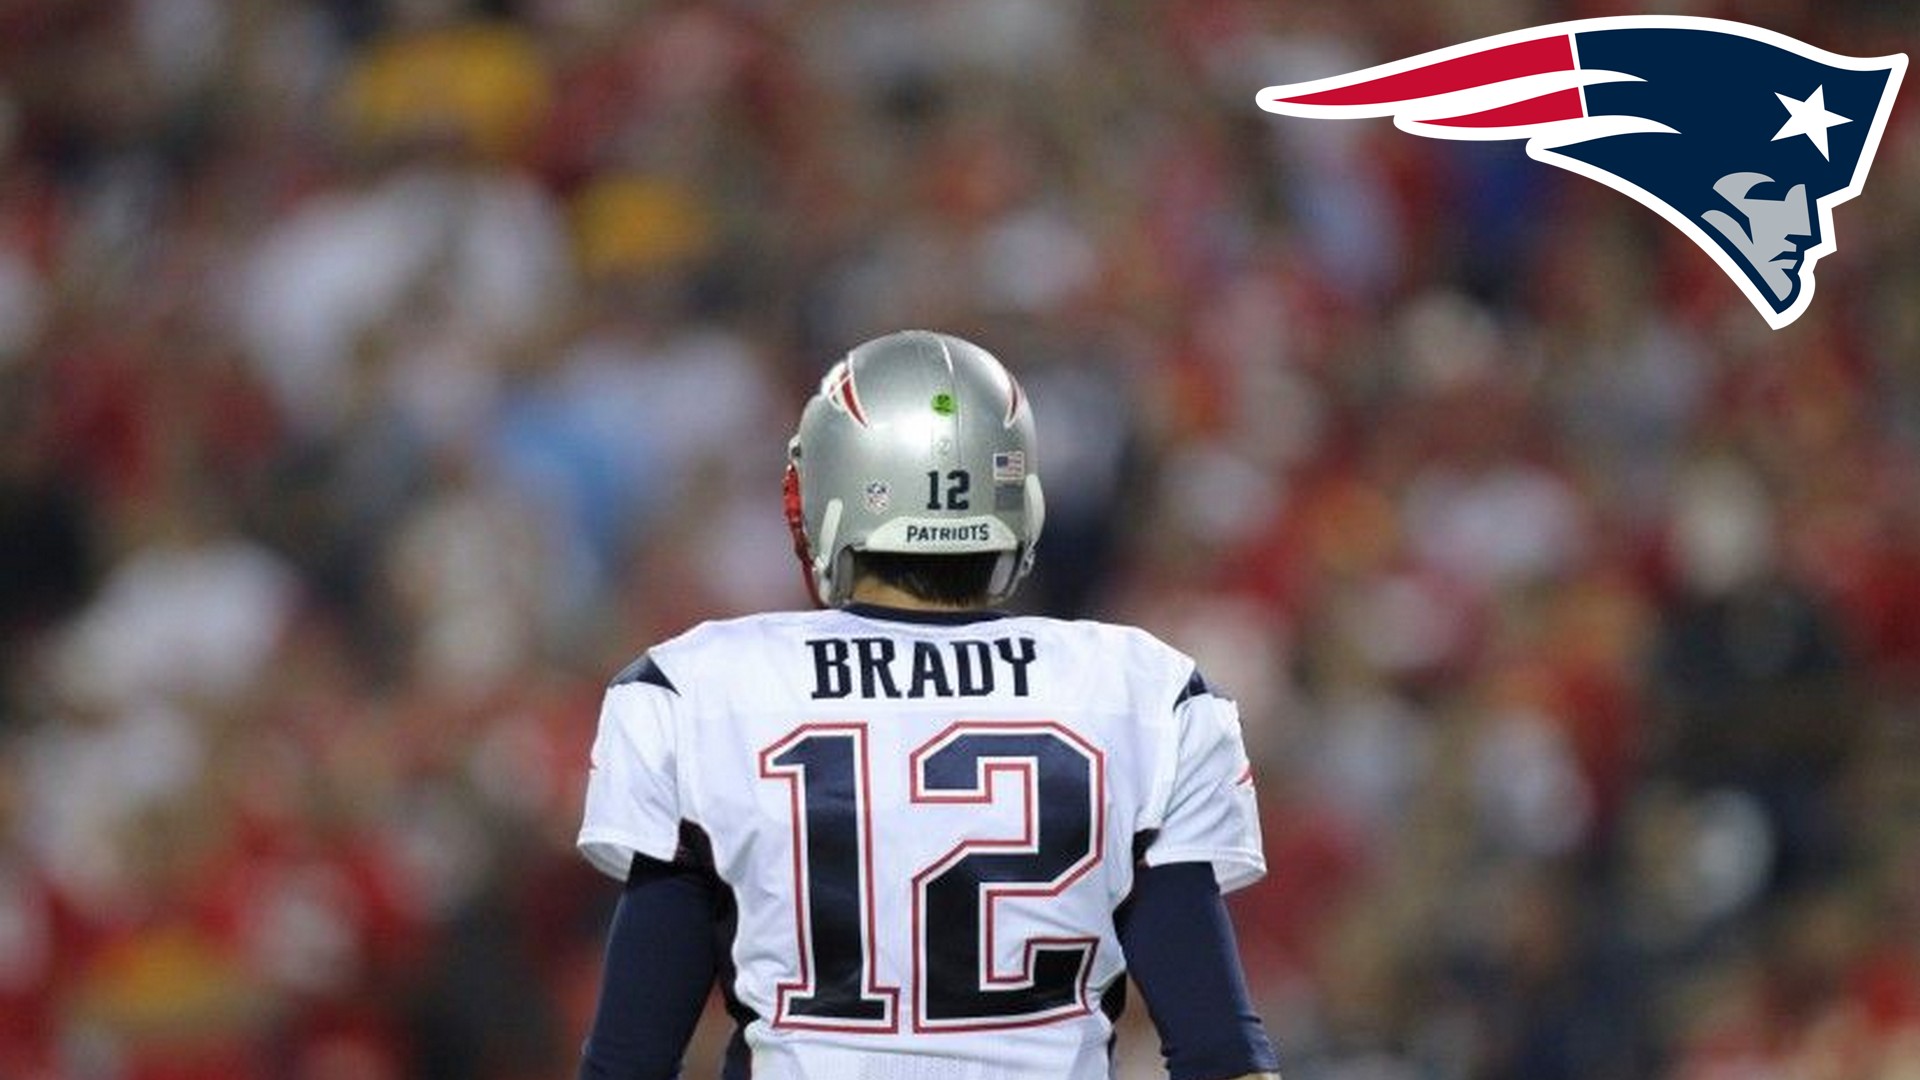 Tom Brady Goat Desktop Wallpapers With Resolution 1920X1080 pixel. You can make this wallpaper for your Mac or Windows Desktop Background, iPhone, Android or Tablet and another Smartphone device for free